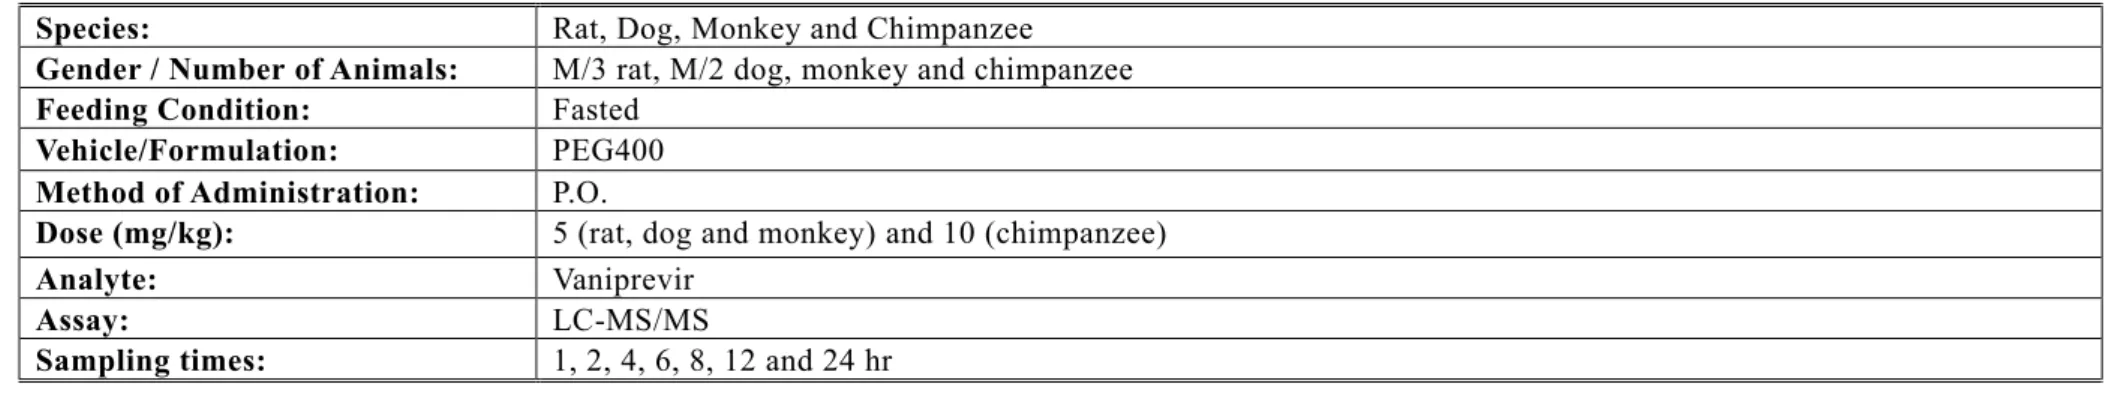 Table 1 Plasma and liver concentrations at specified times after a single oral administration of vaniprevir (5 mg/kg) Time (hr) Rat Liver(nM) Rat Plasma (nM) Dog Liver(nM) Dog Plasma (nM) Monkey Liver (nM) Monkey Plasma (nM) Chimpanzee Liver (nM) Chimpanze